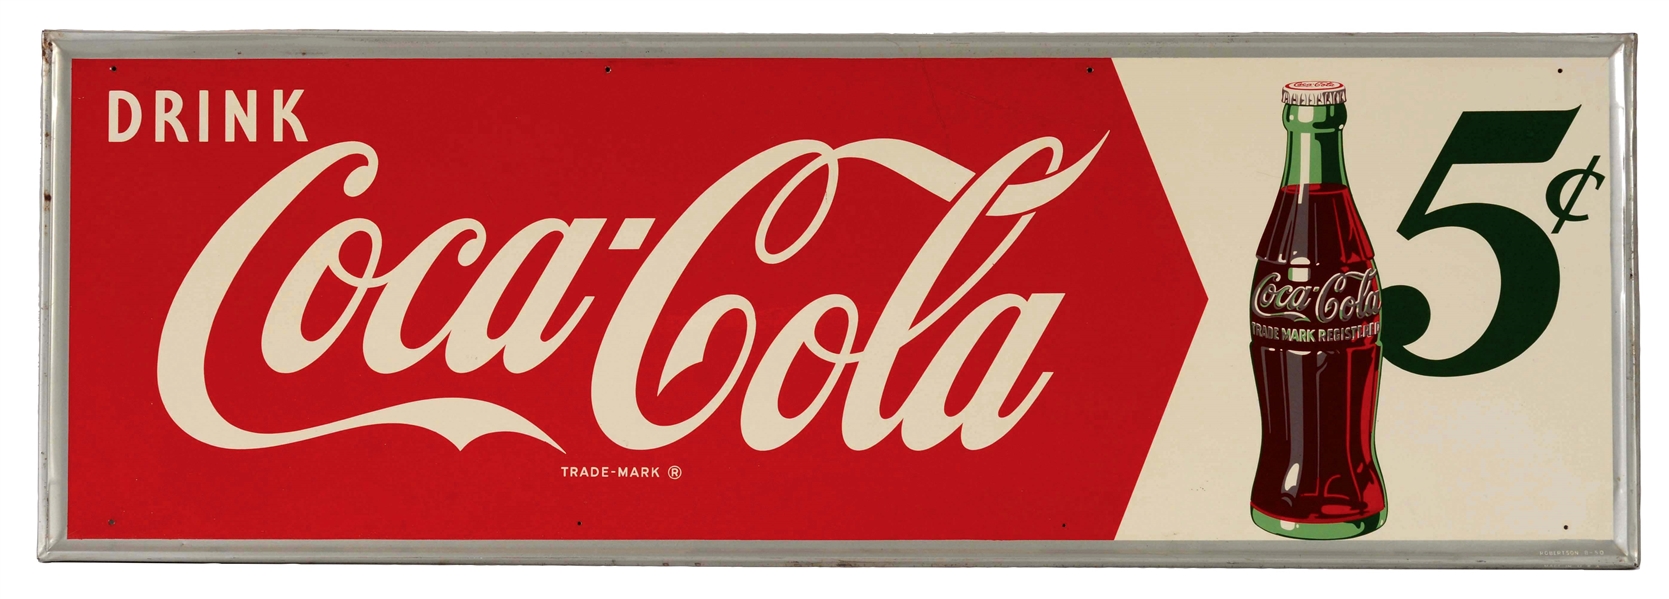 DRINK COCA-COLA 5¢ TIN SIGN WITH SELF FRAMED EDGE.